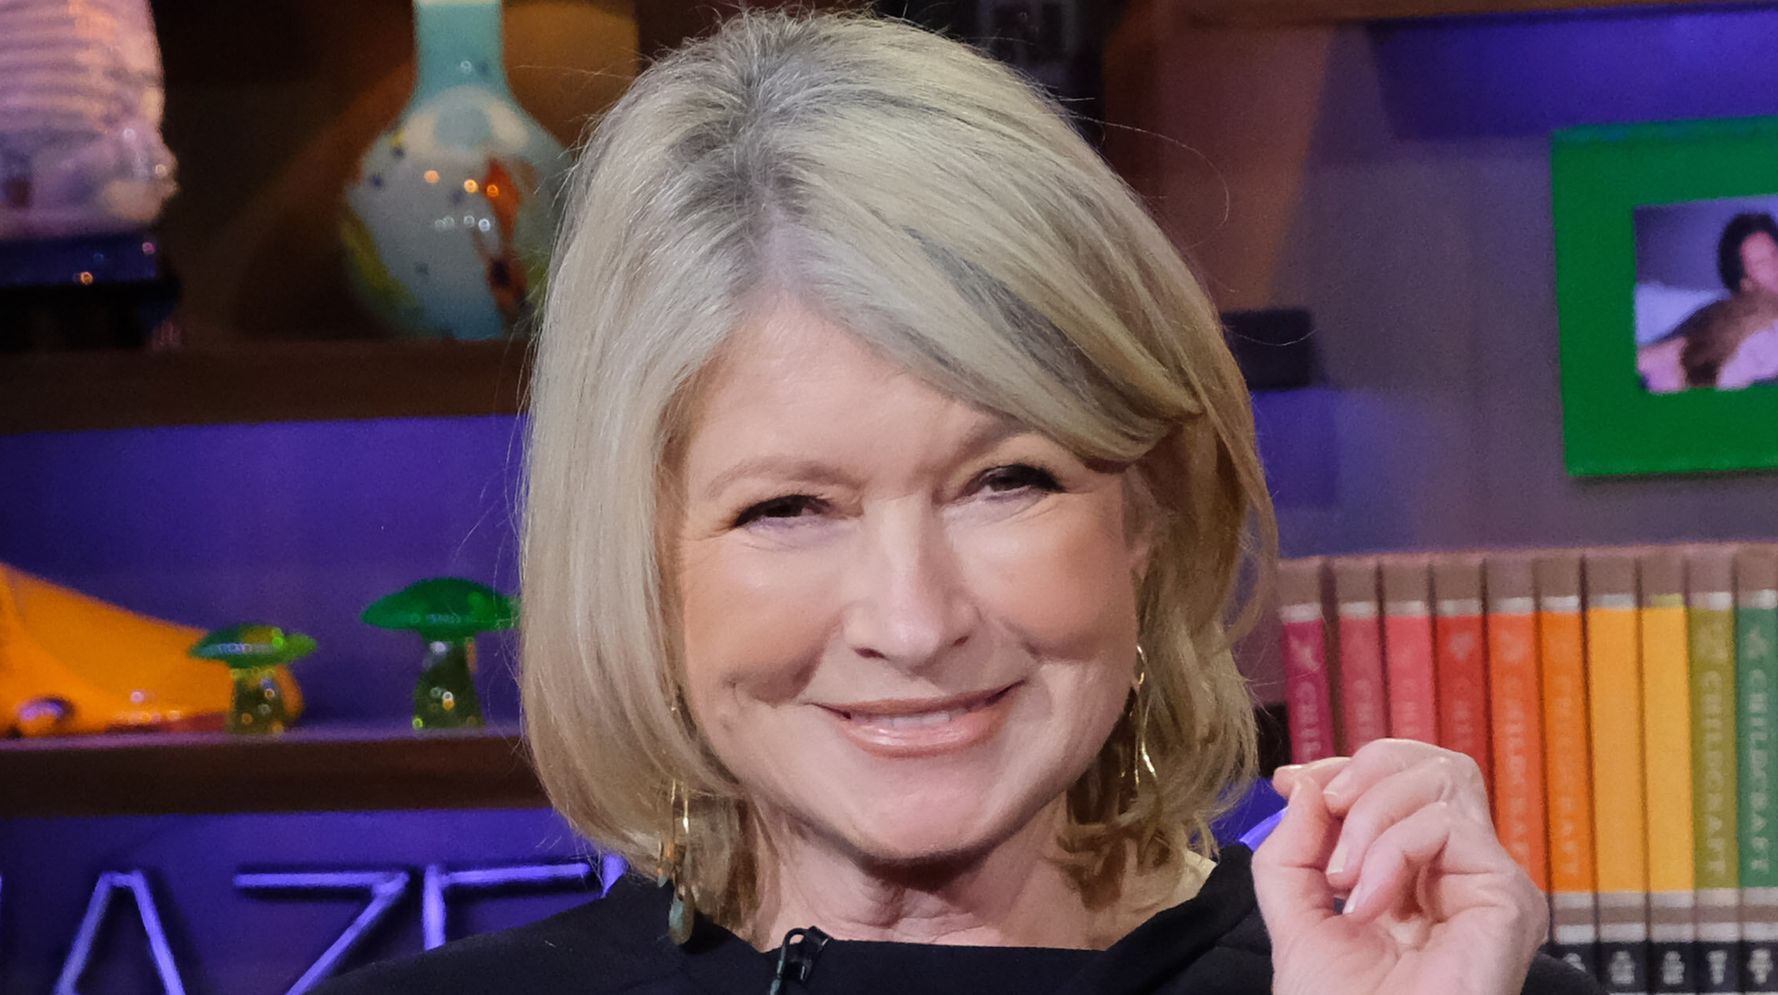 A Very Relatable Martha Stewart Corrects 'Fake News' Story About Her Many Peacocks